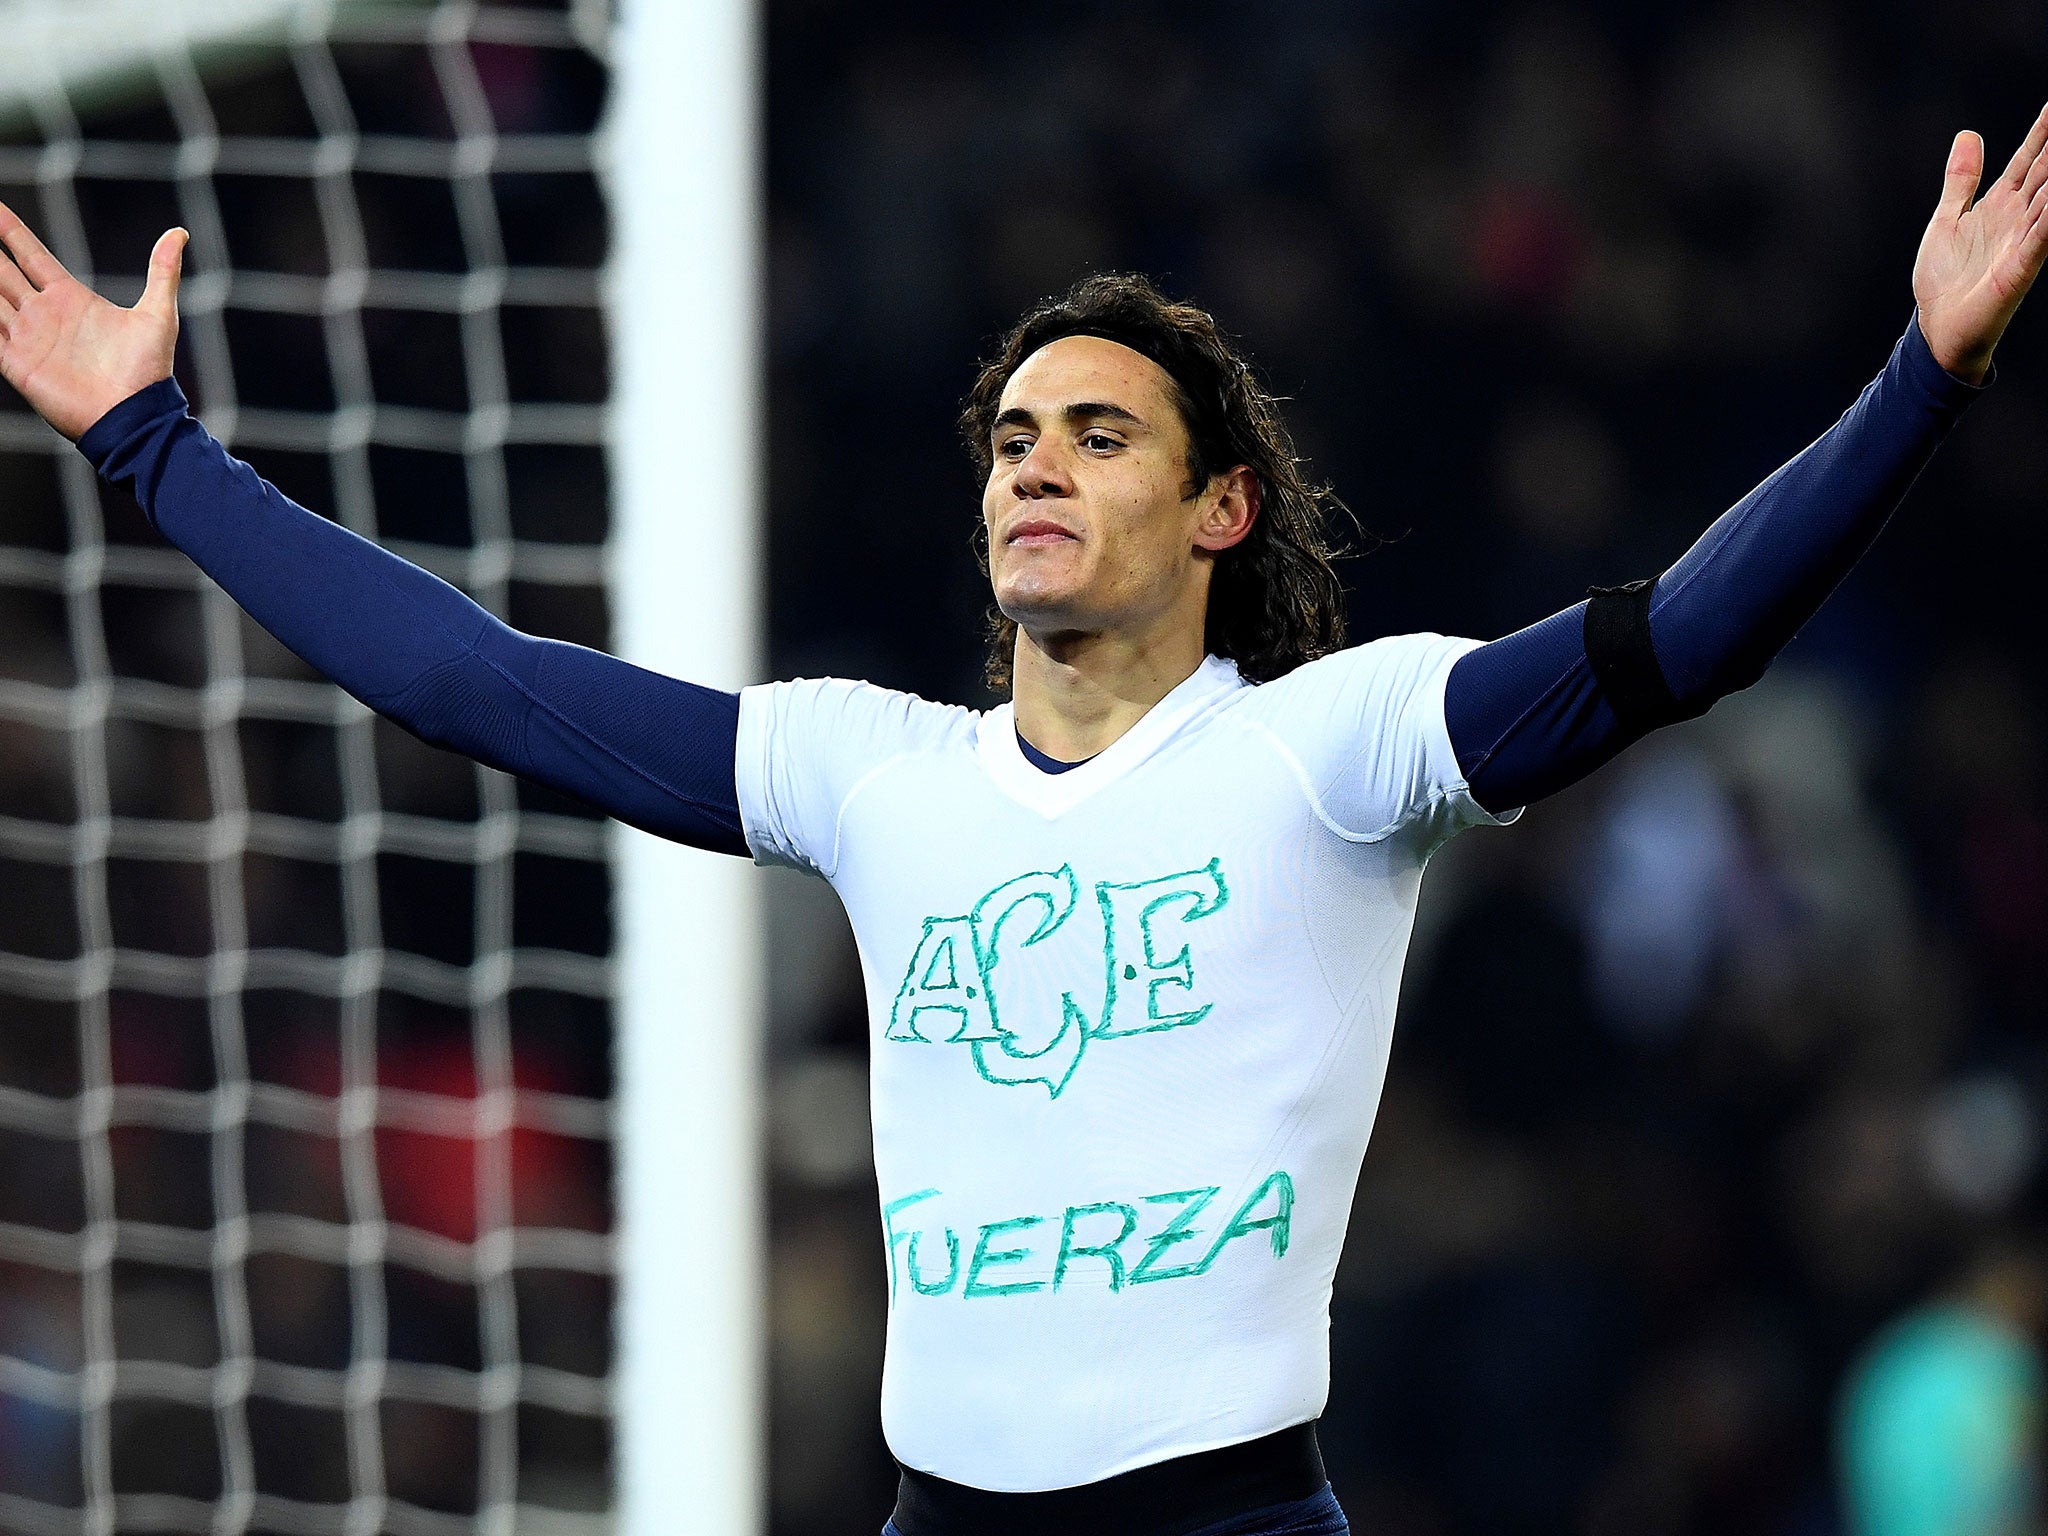 Cavani revealed the message after scoring a penalty for PSG